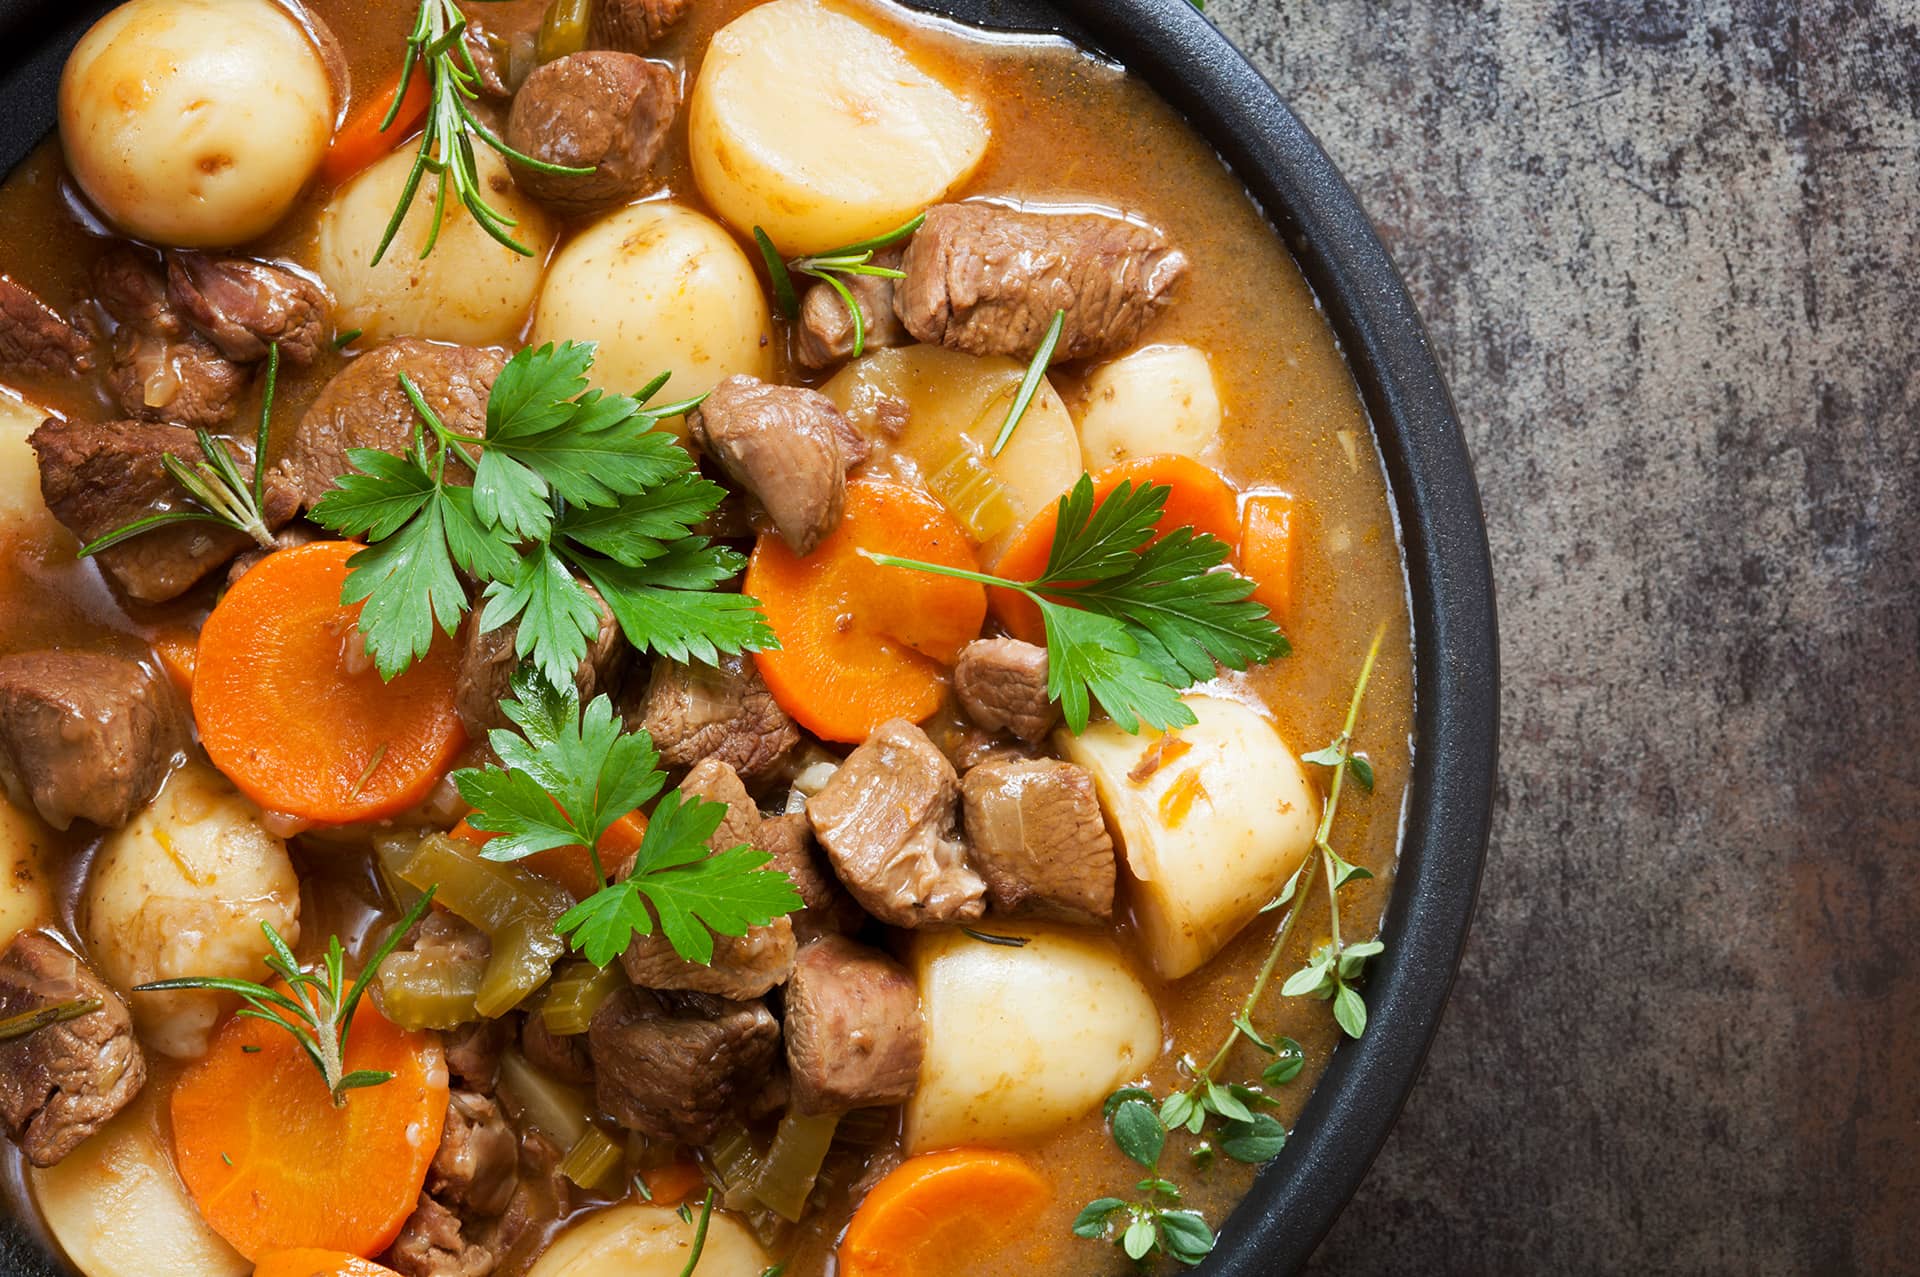 Beef stew in a pot